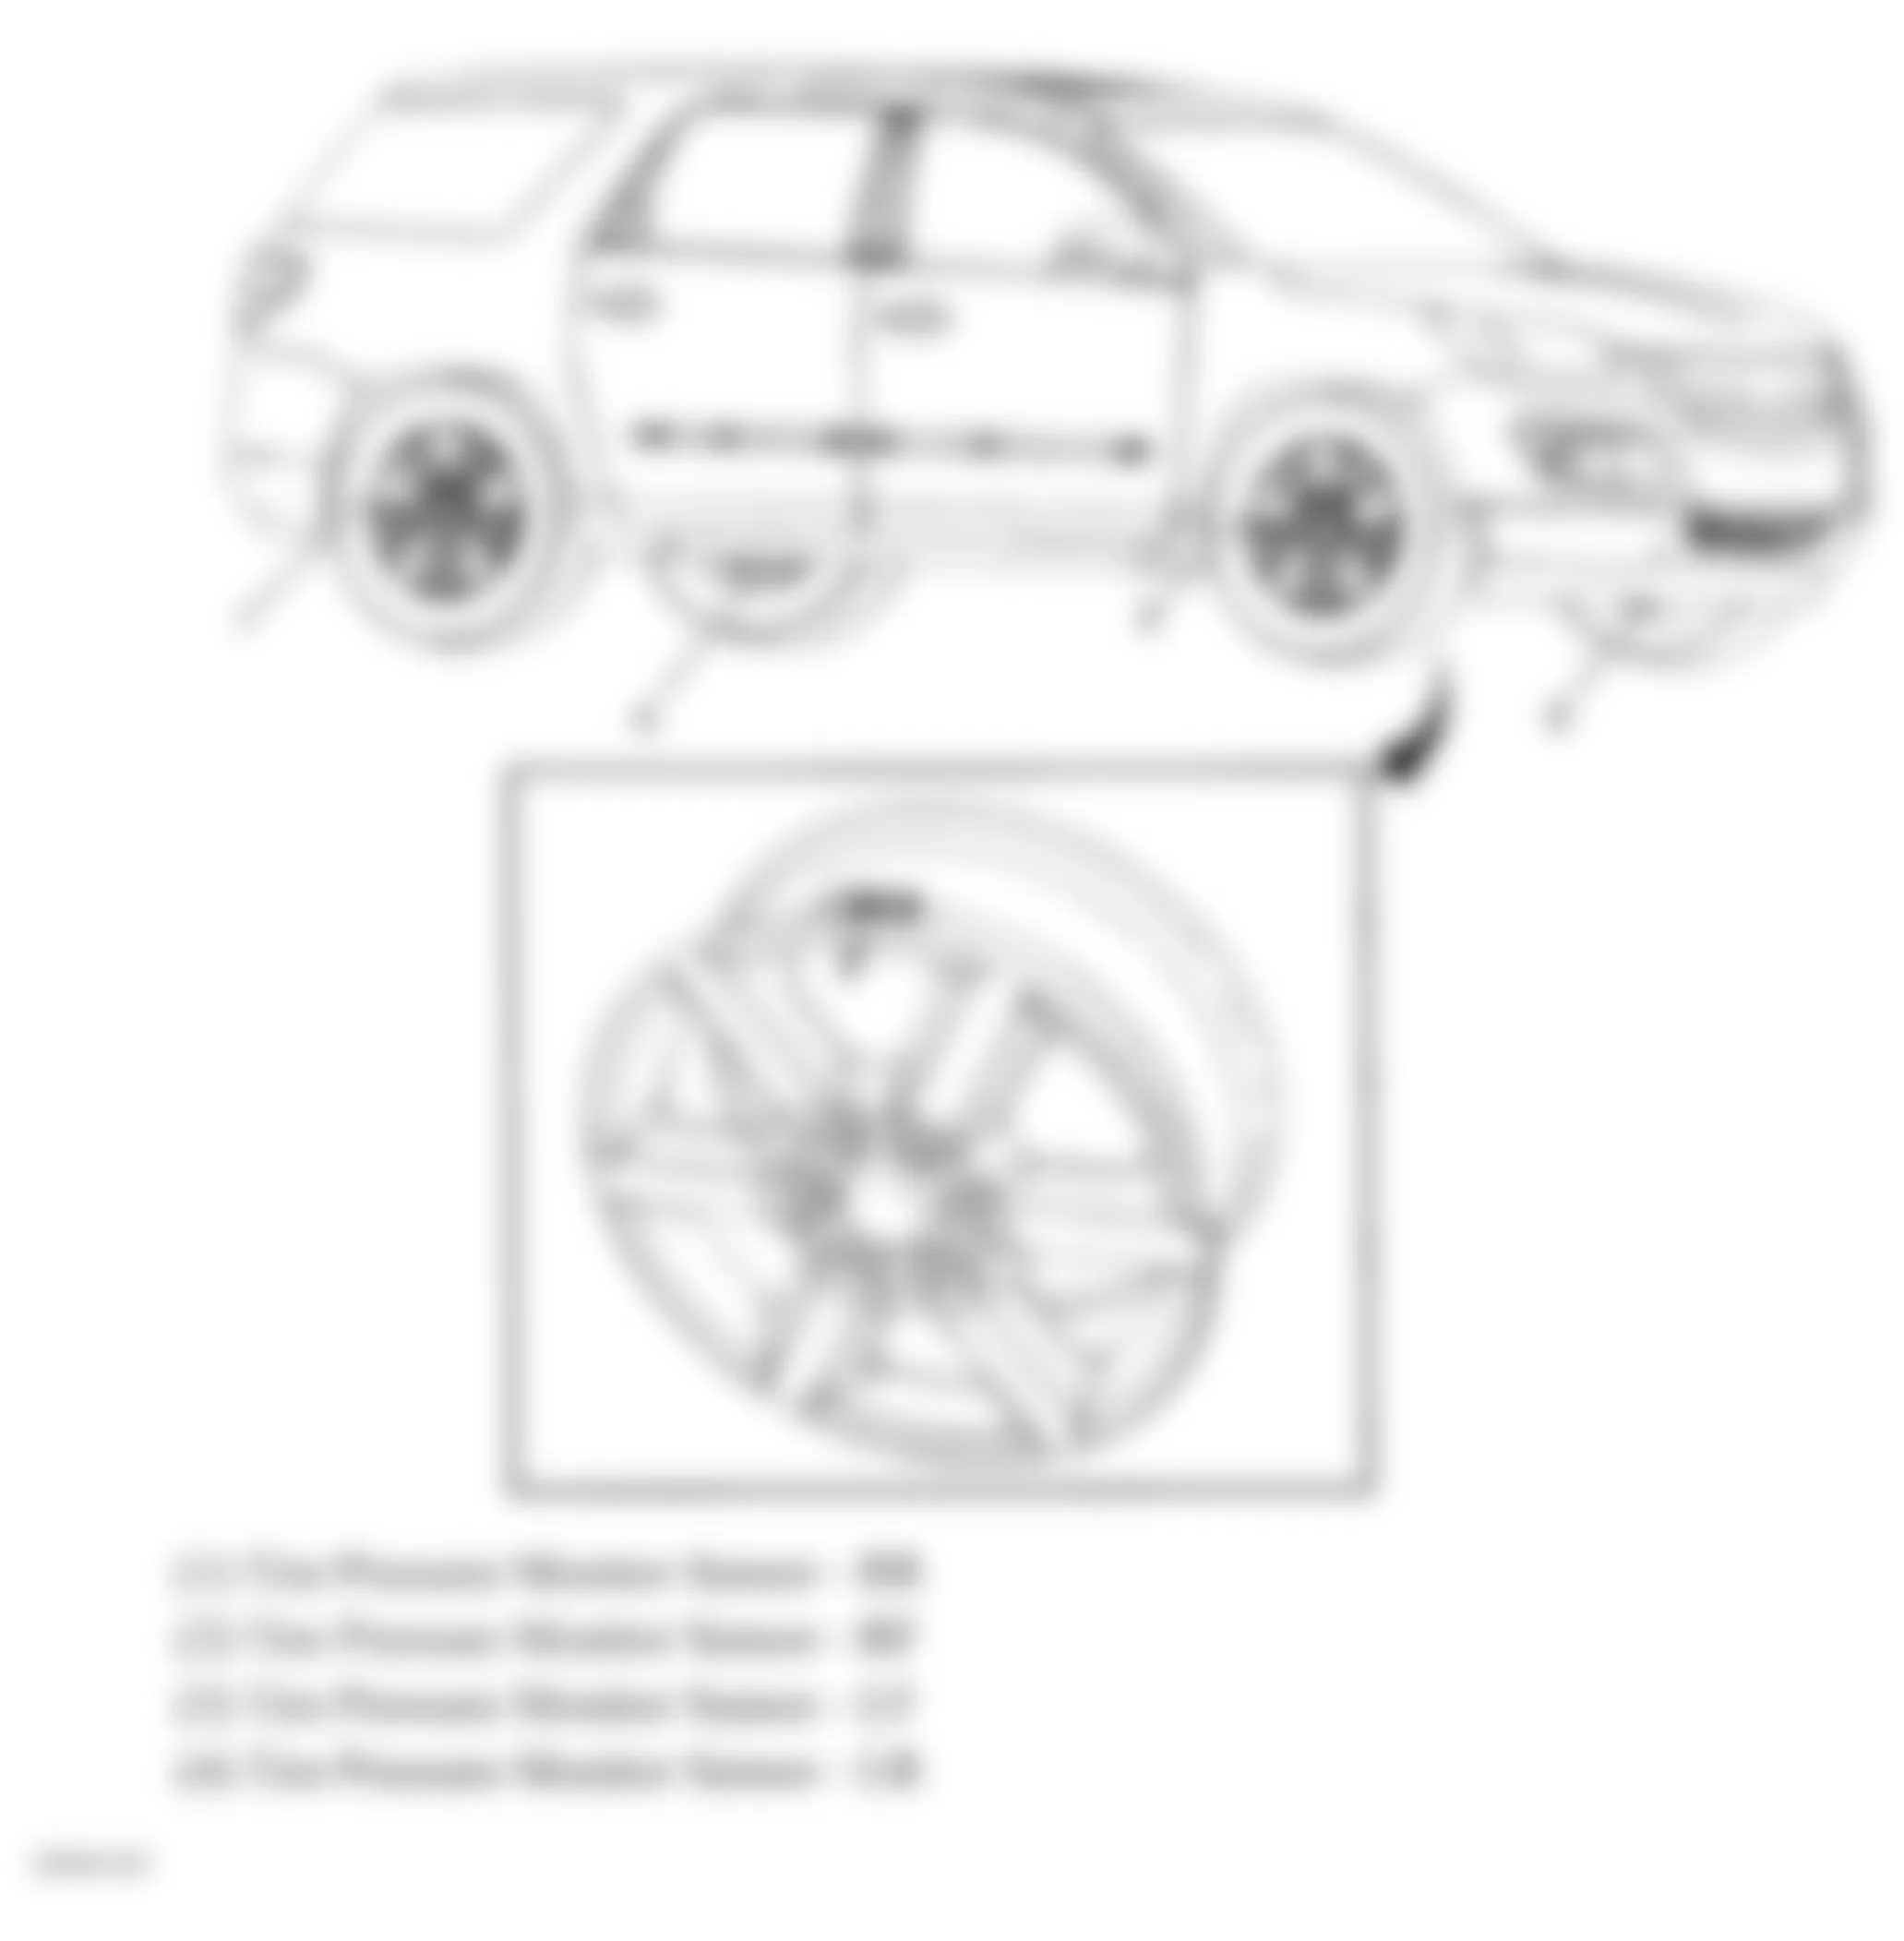 GMC Acadia SLE 2007 - Component Locations -  Vehicle Tire Overview